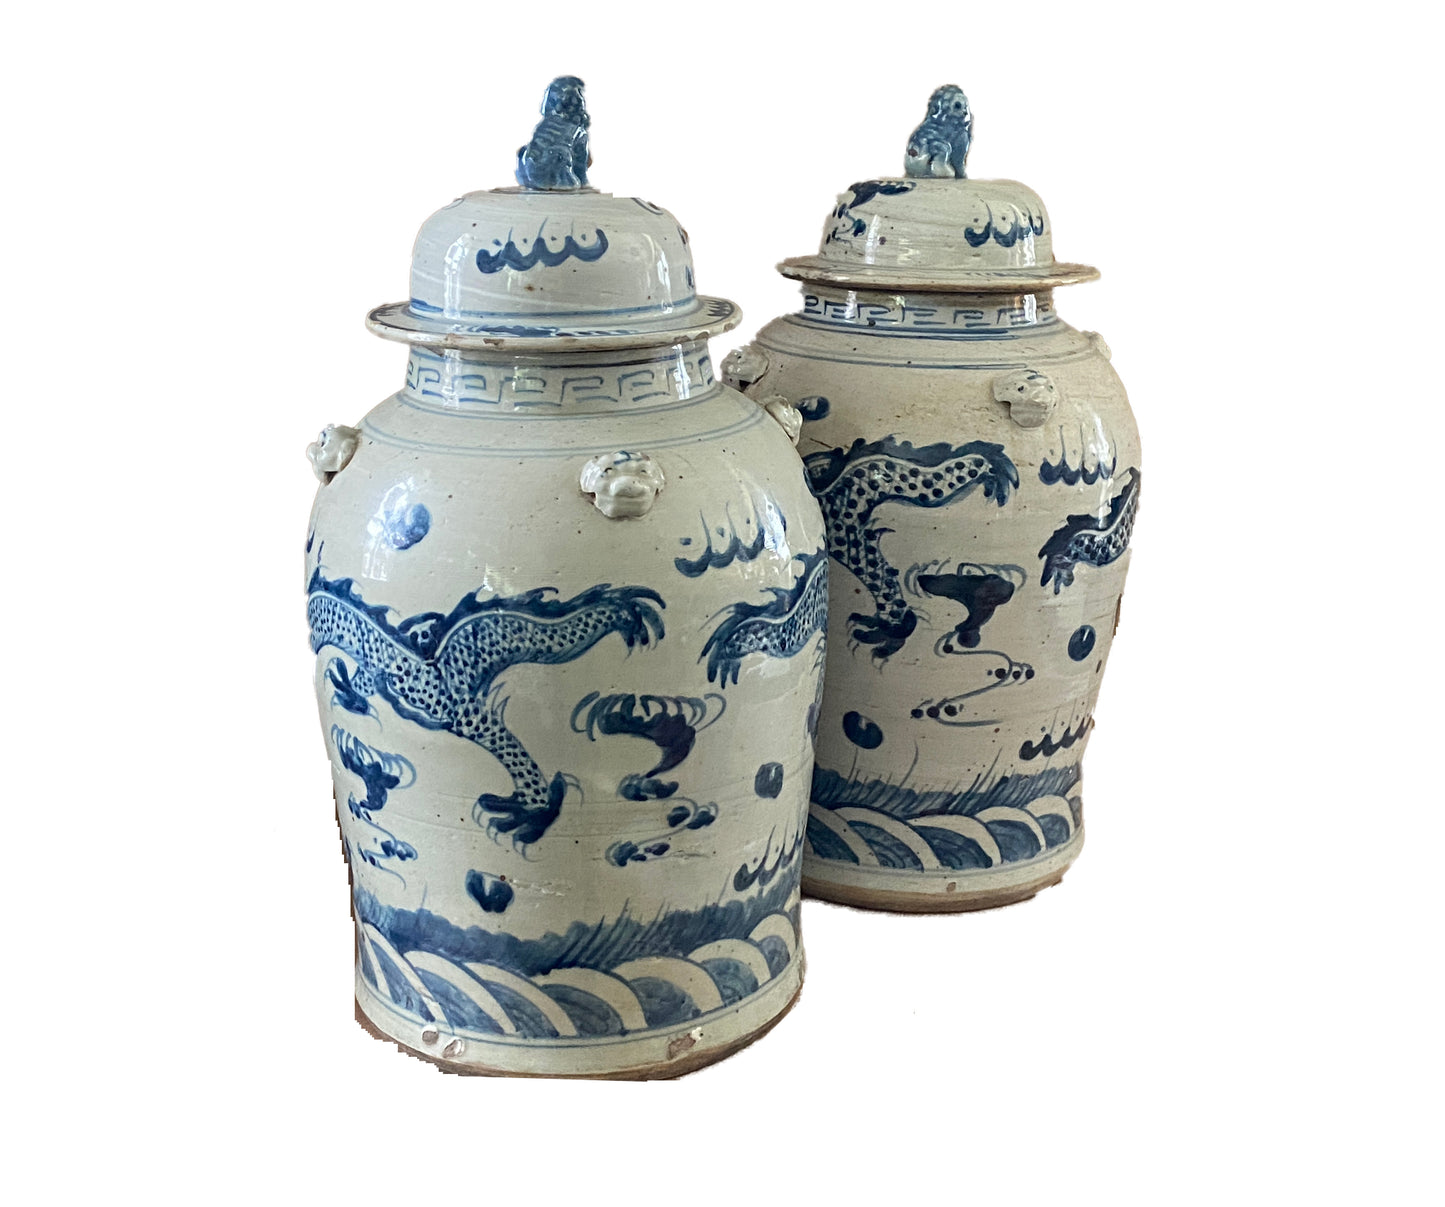 #3148 Chinoiserie Blue and White Porcelain Ginger Jars With Dragons -Pair